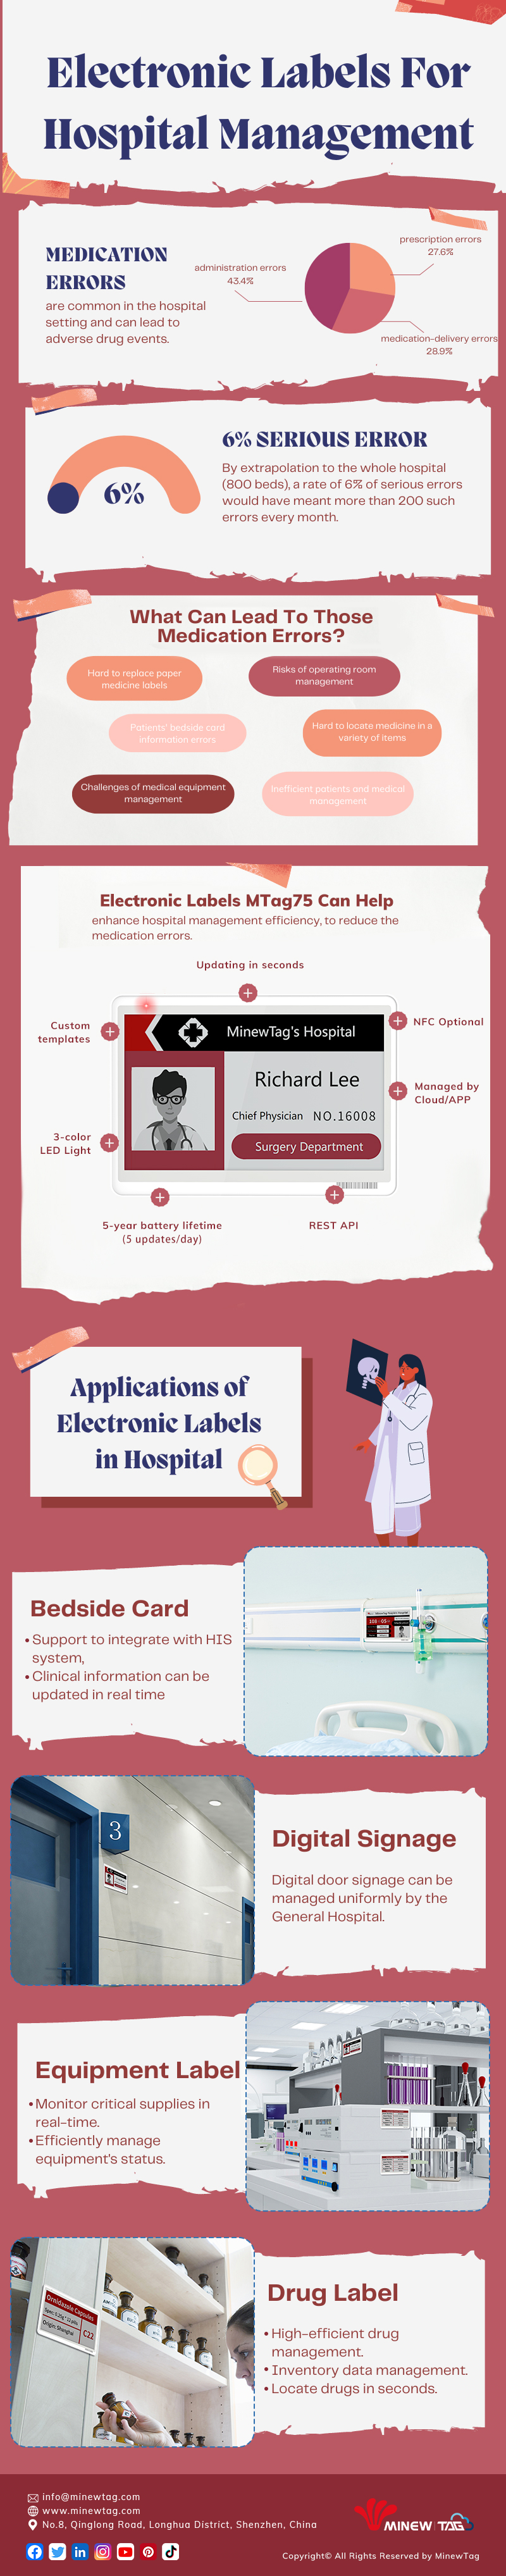 Electronic labels for healthcare infographic.jpg